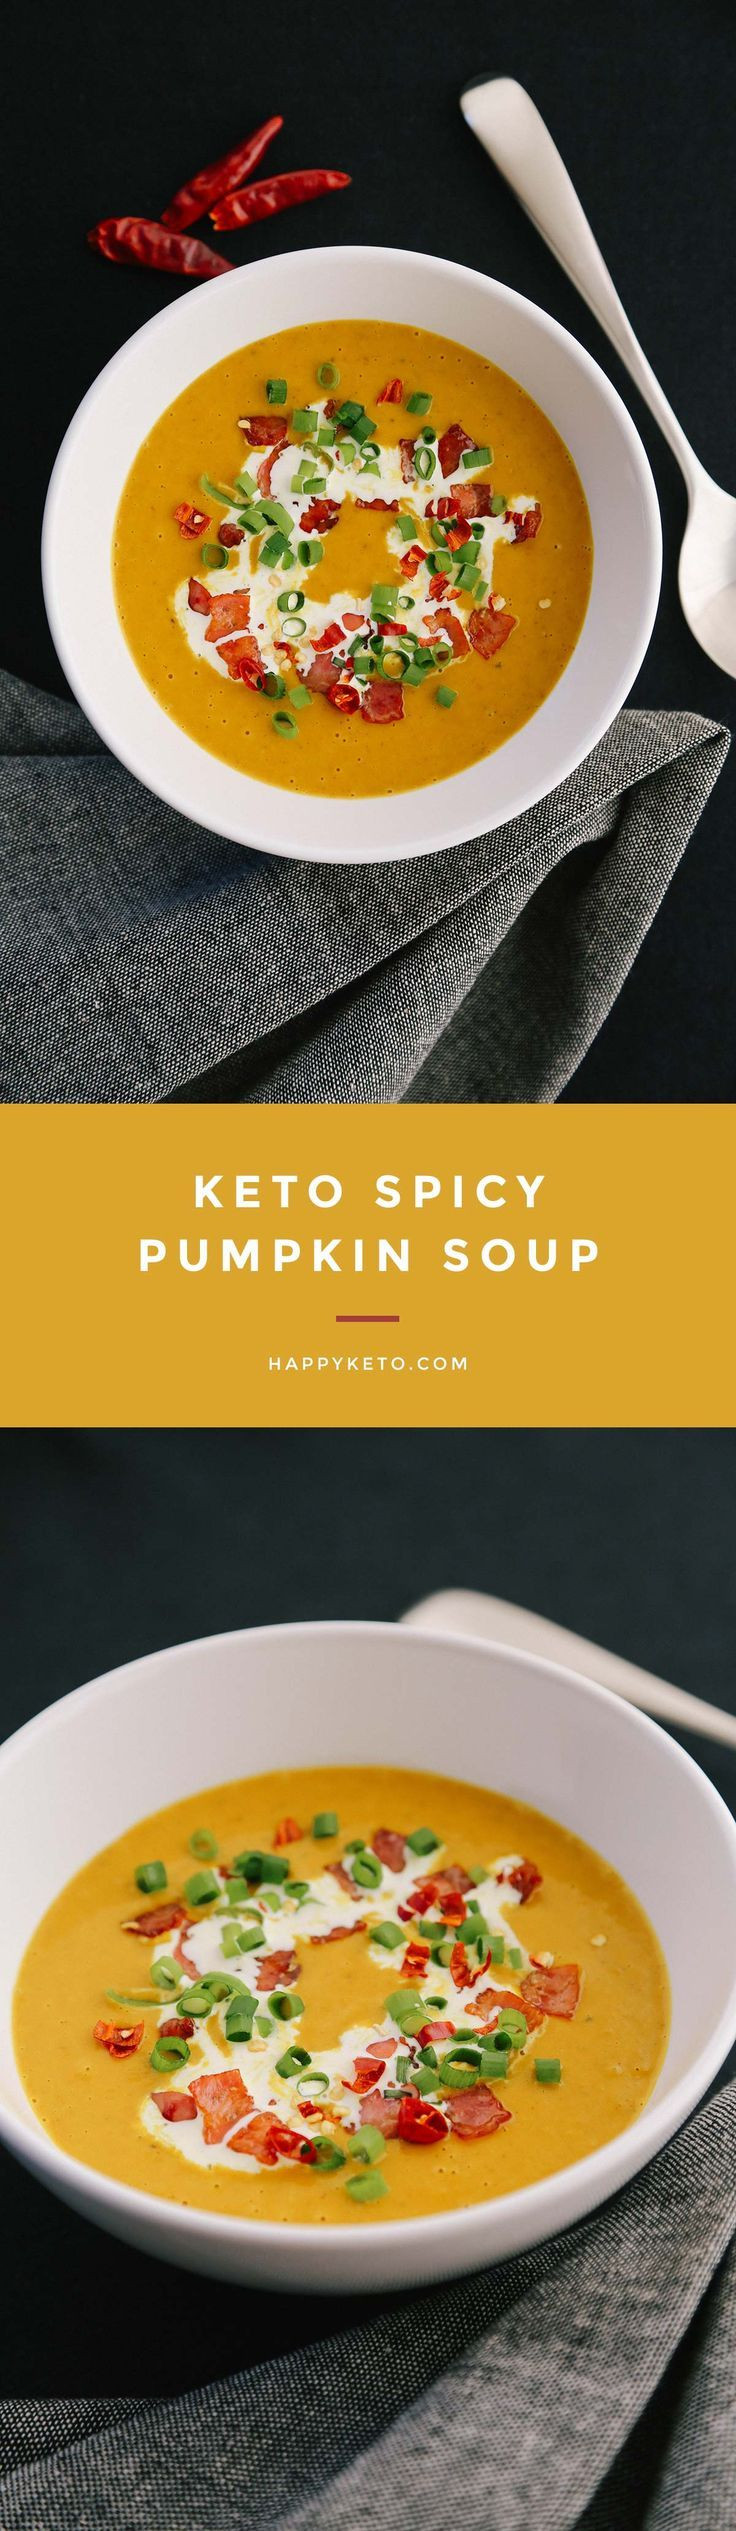 Pumpkin Keto Recipes Dinner
 Keto Pumpkin Soup with Cumin and Ginger Low Carb Happy